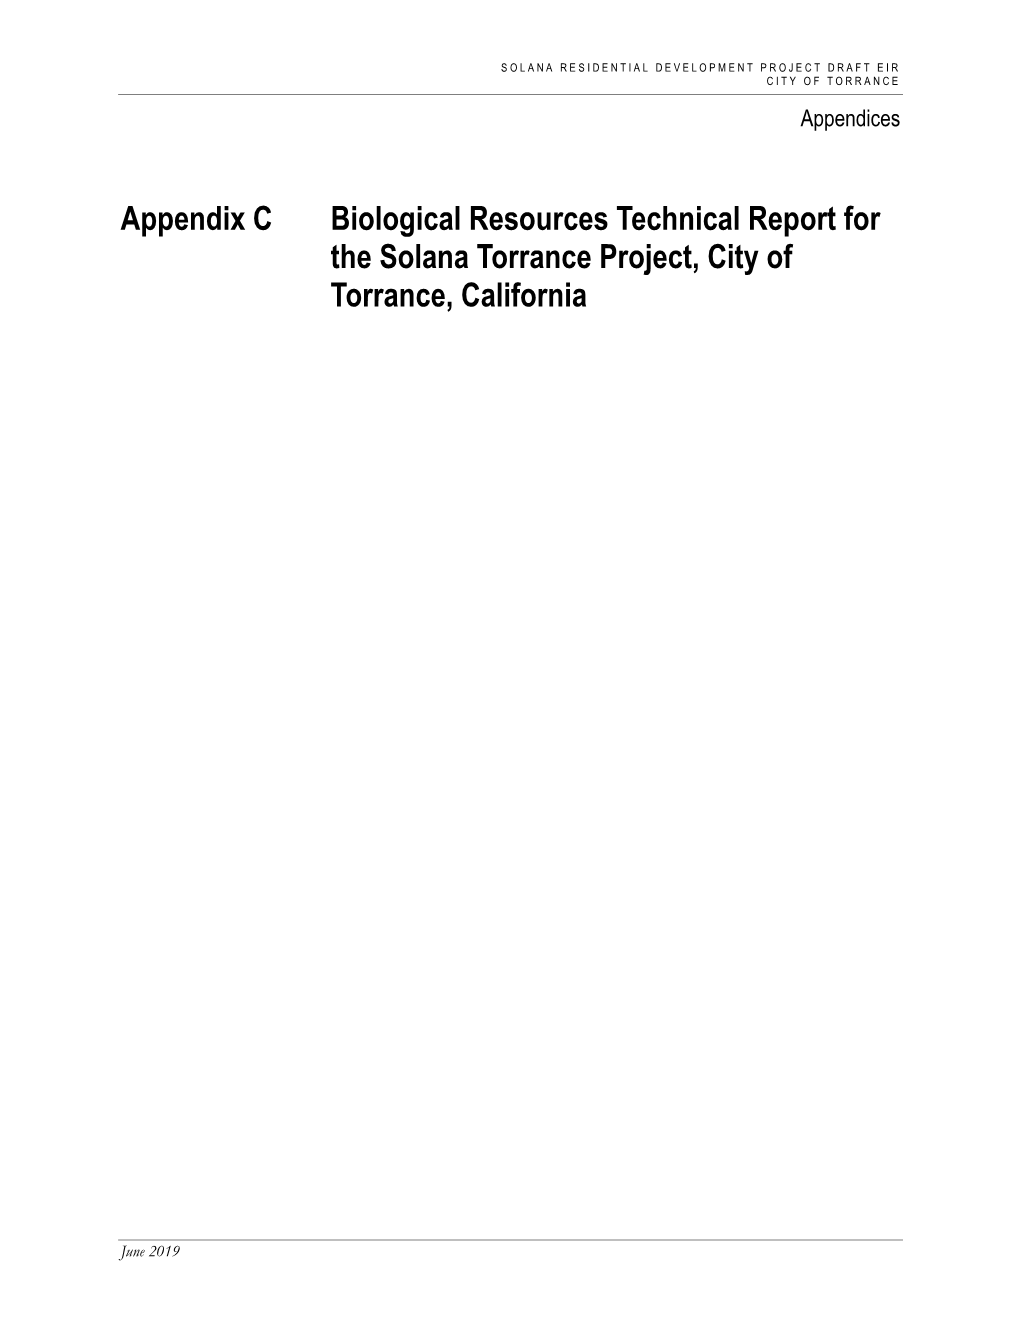 Biological Resources Technical Report for the Solana Torrance Project, City of Torrance, California